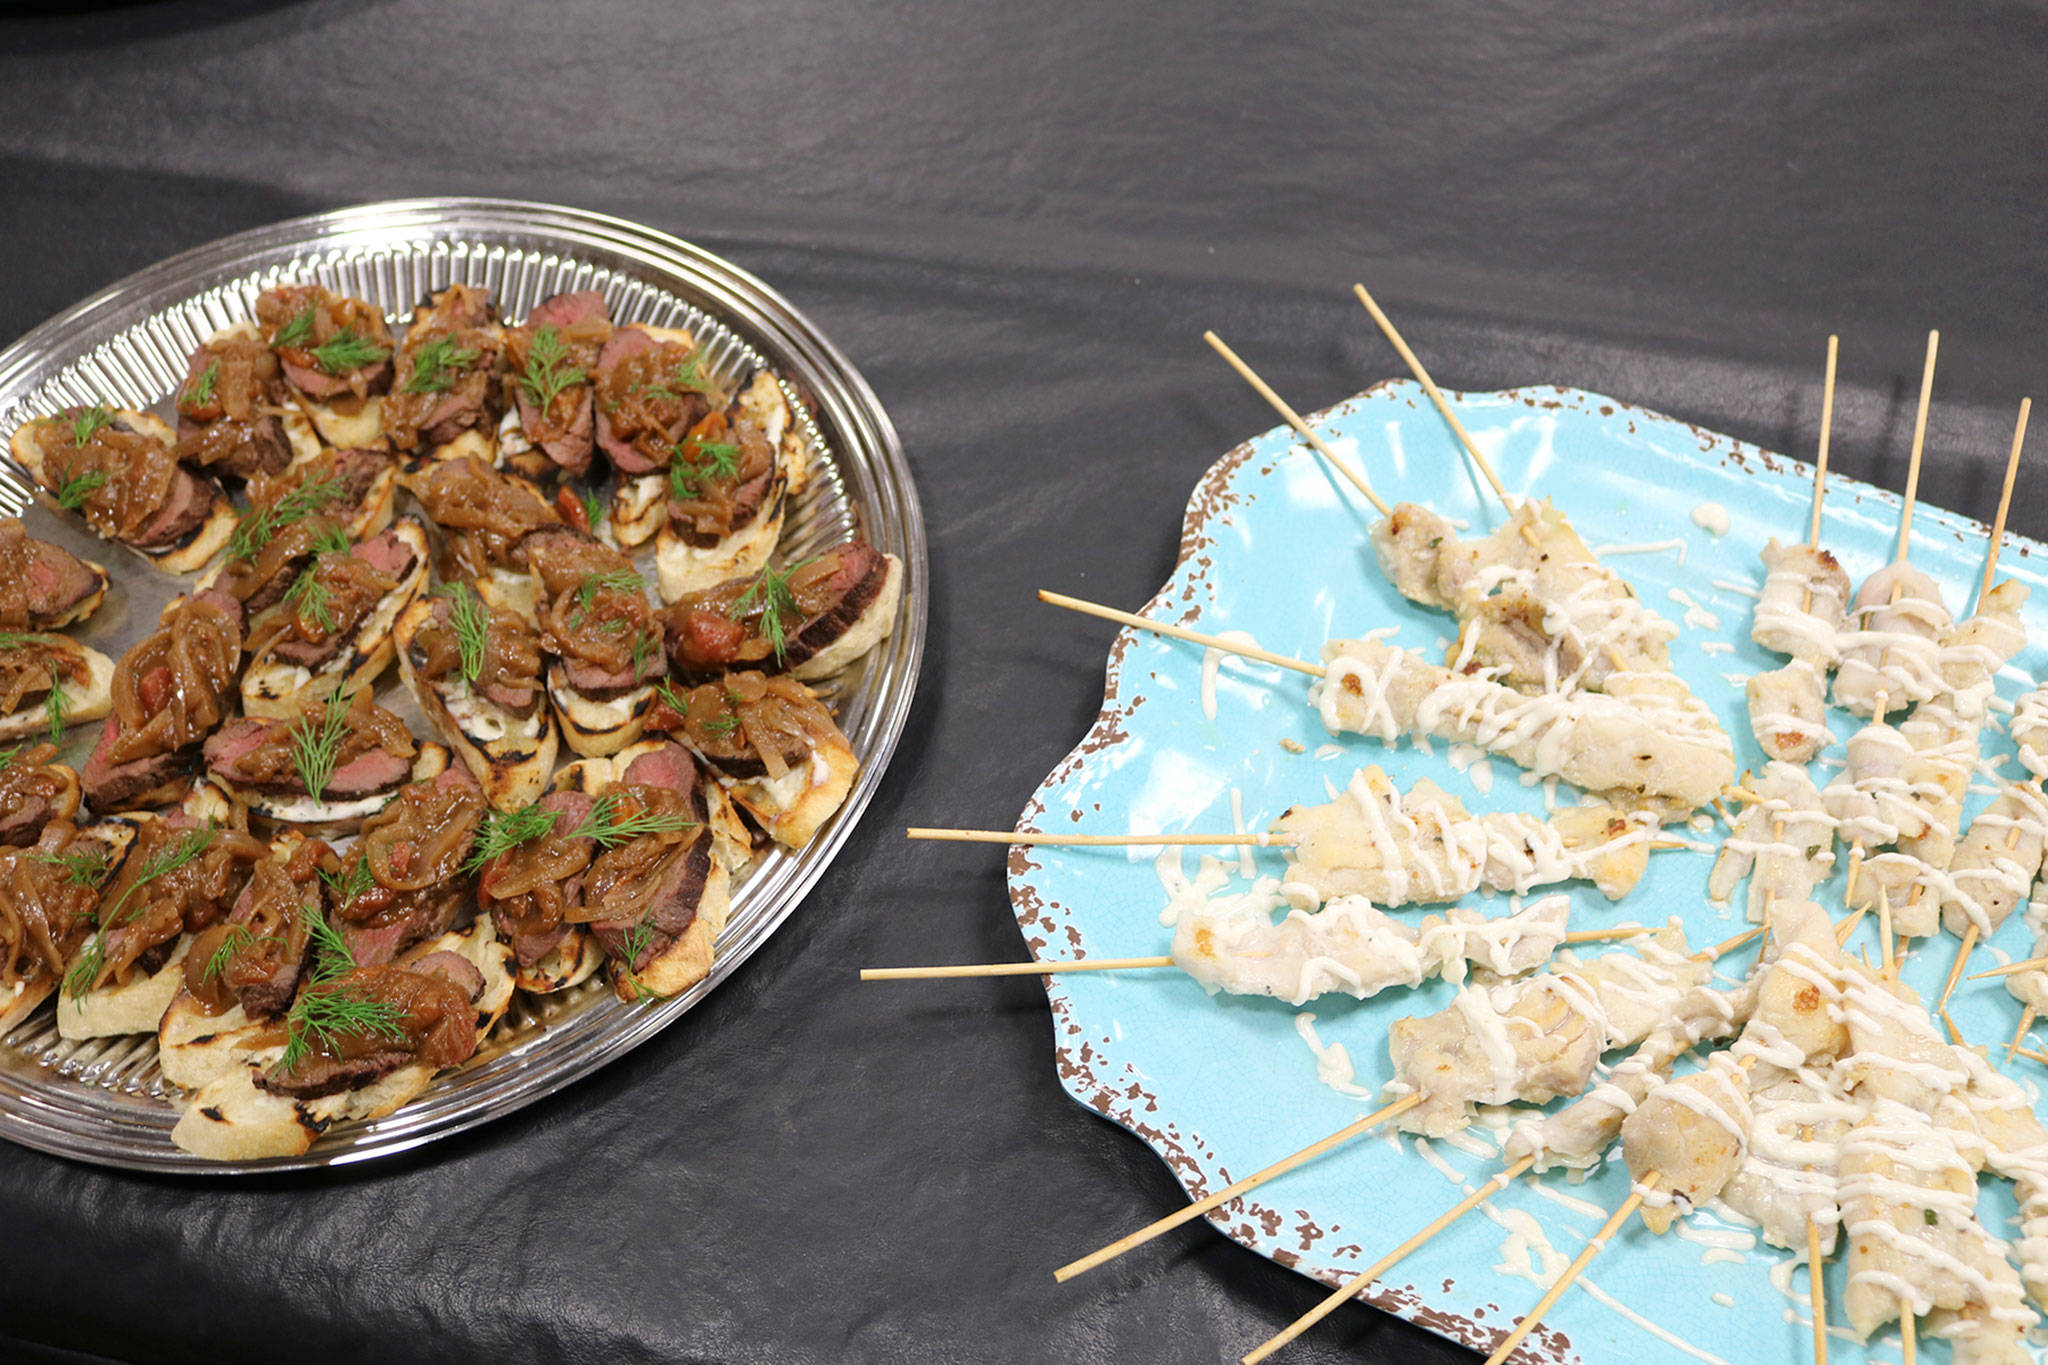 Kangaroo and alligator dishes were served to Covenant Shores residents on March 1. Katie Metzger/staff photo